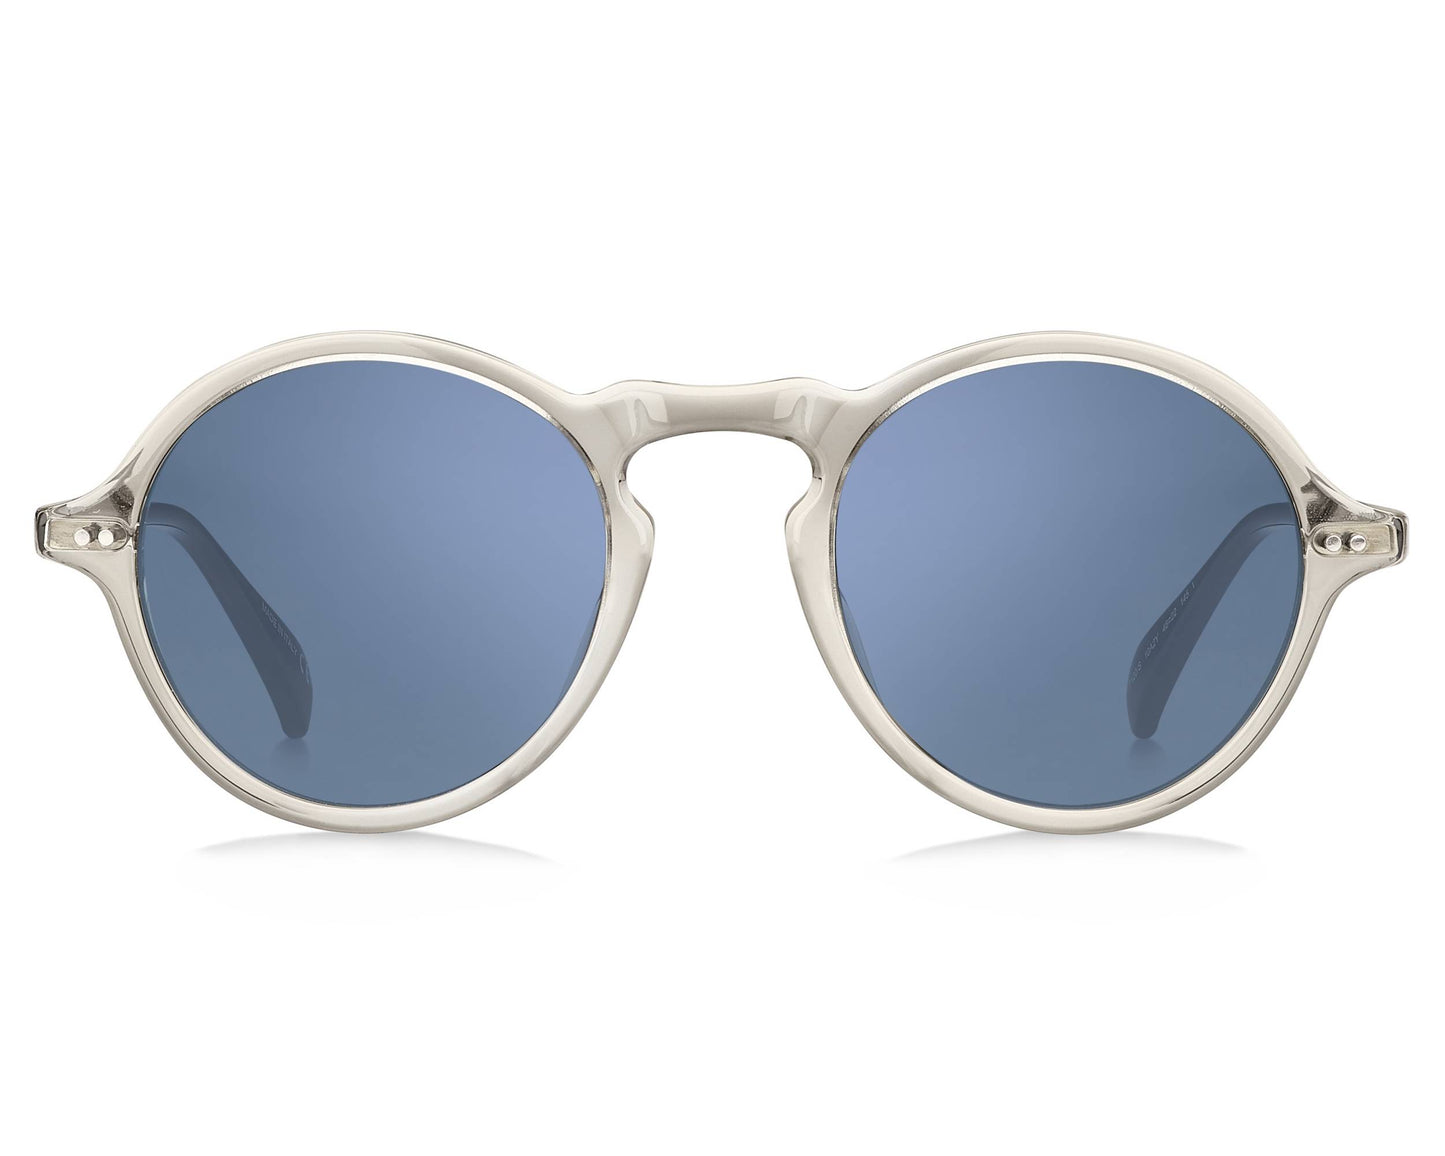 Givenchy Men's Sunglasses - Round